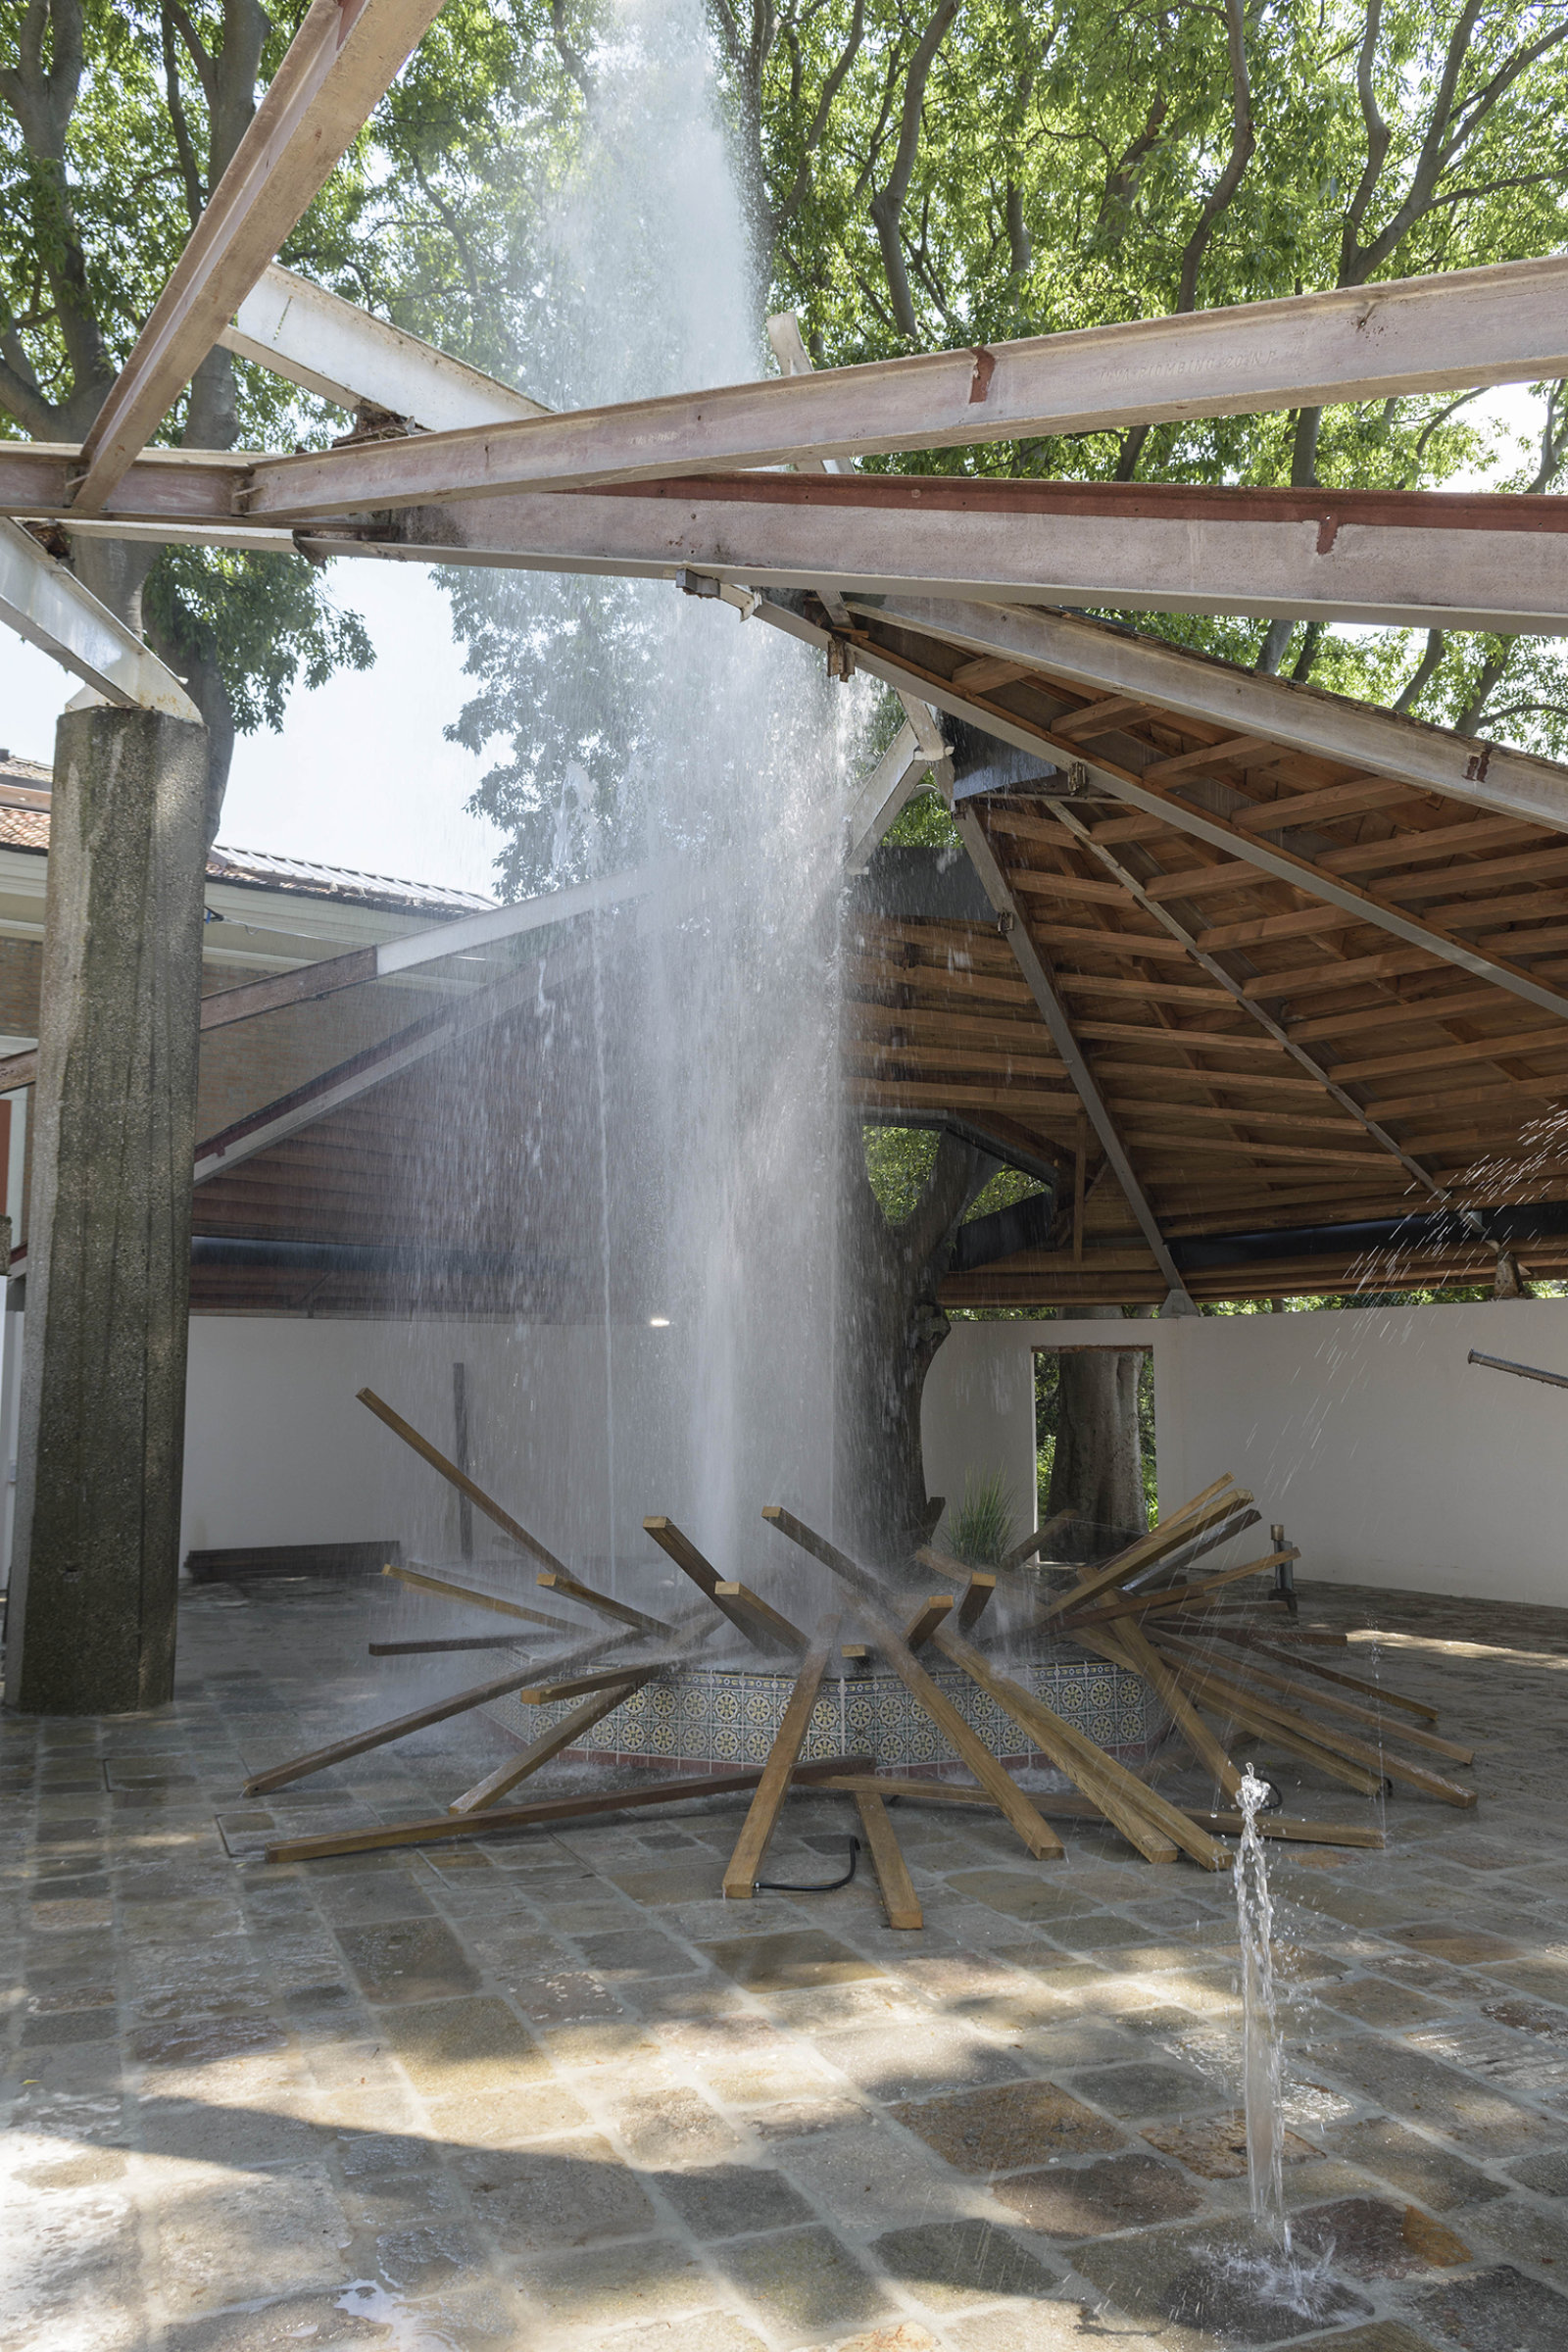 Geoffrey Farmer, SFAI Fountain, 2017, resin structure covered by ceramic tiles, artificial plants, acid-etched brass, waterworks, 150 x 150 x 19 in. (381 x 381 x 47 cm). Installation view, A way out of the mirror, Canada Pavilion, 57th Venice Biennale, Venice, Italy